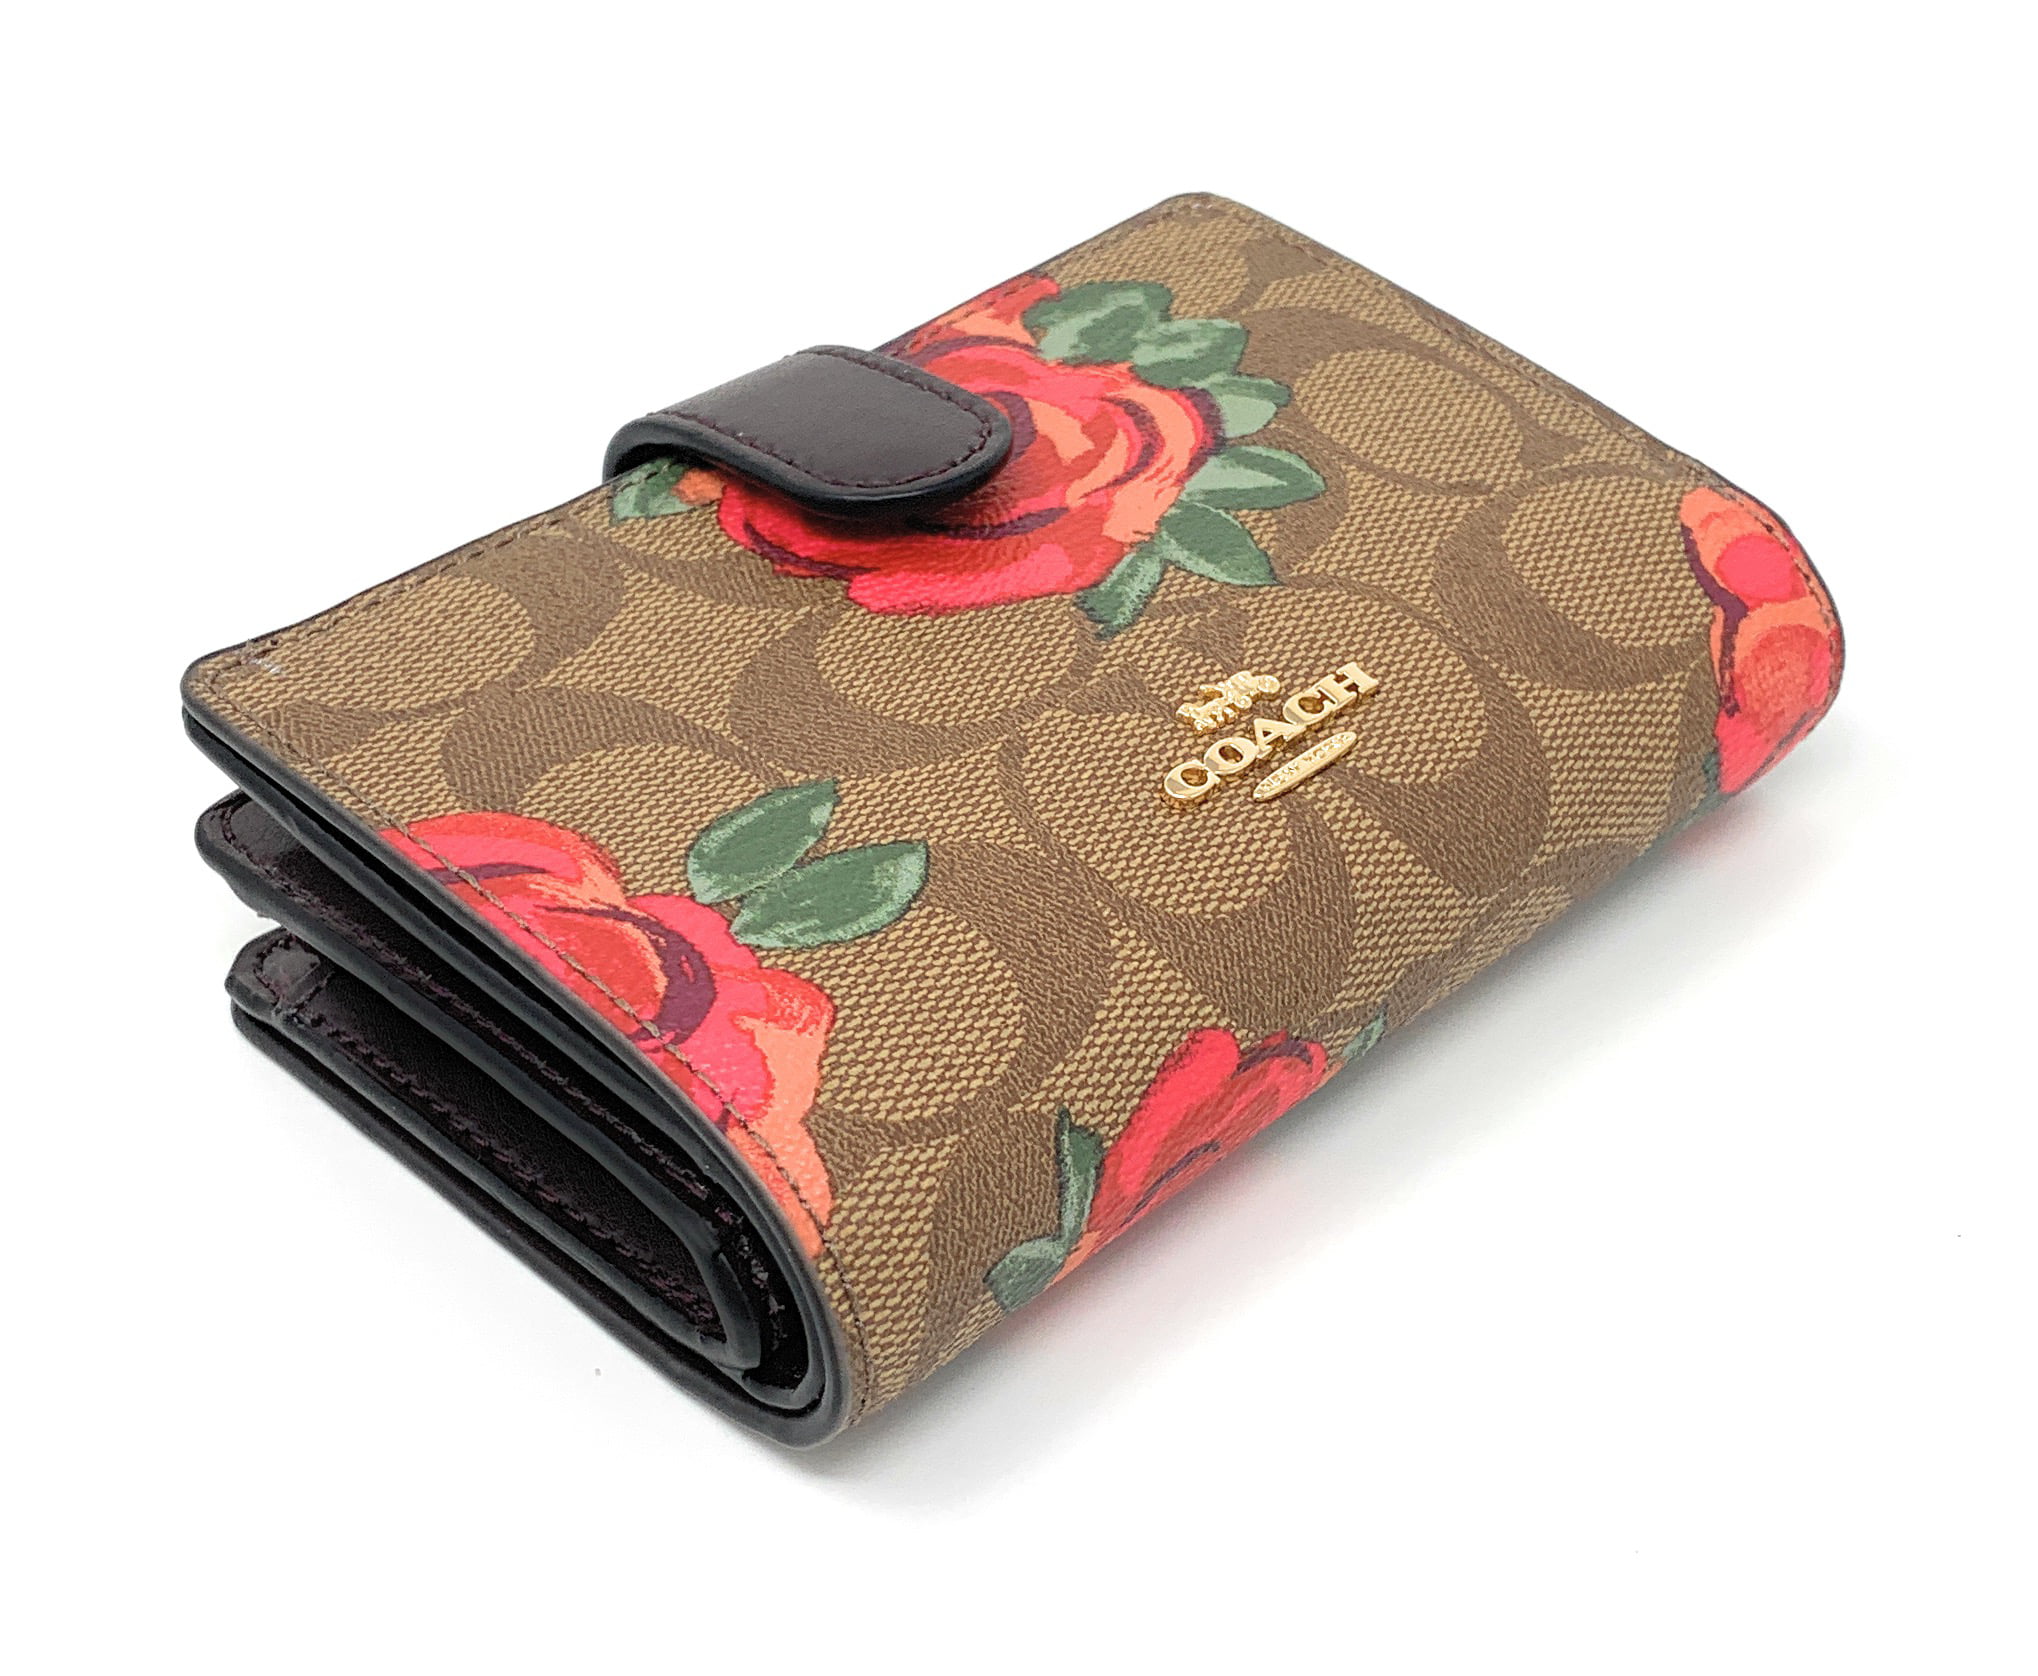 COACH®  Medium Corner Zip Wallet With Country Floral Print